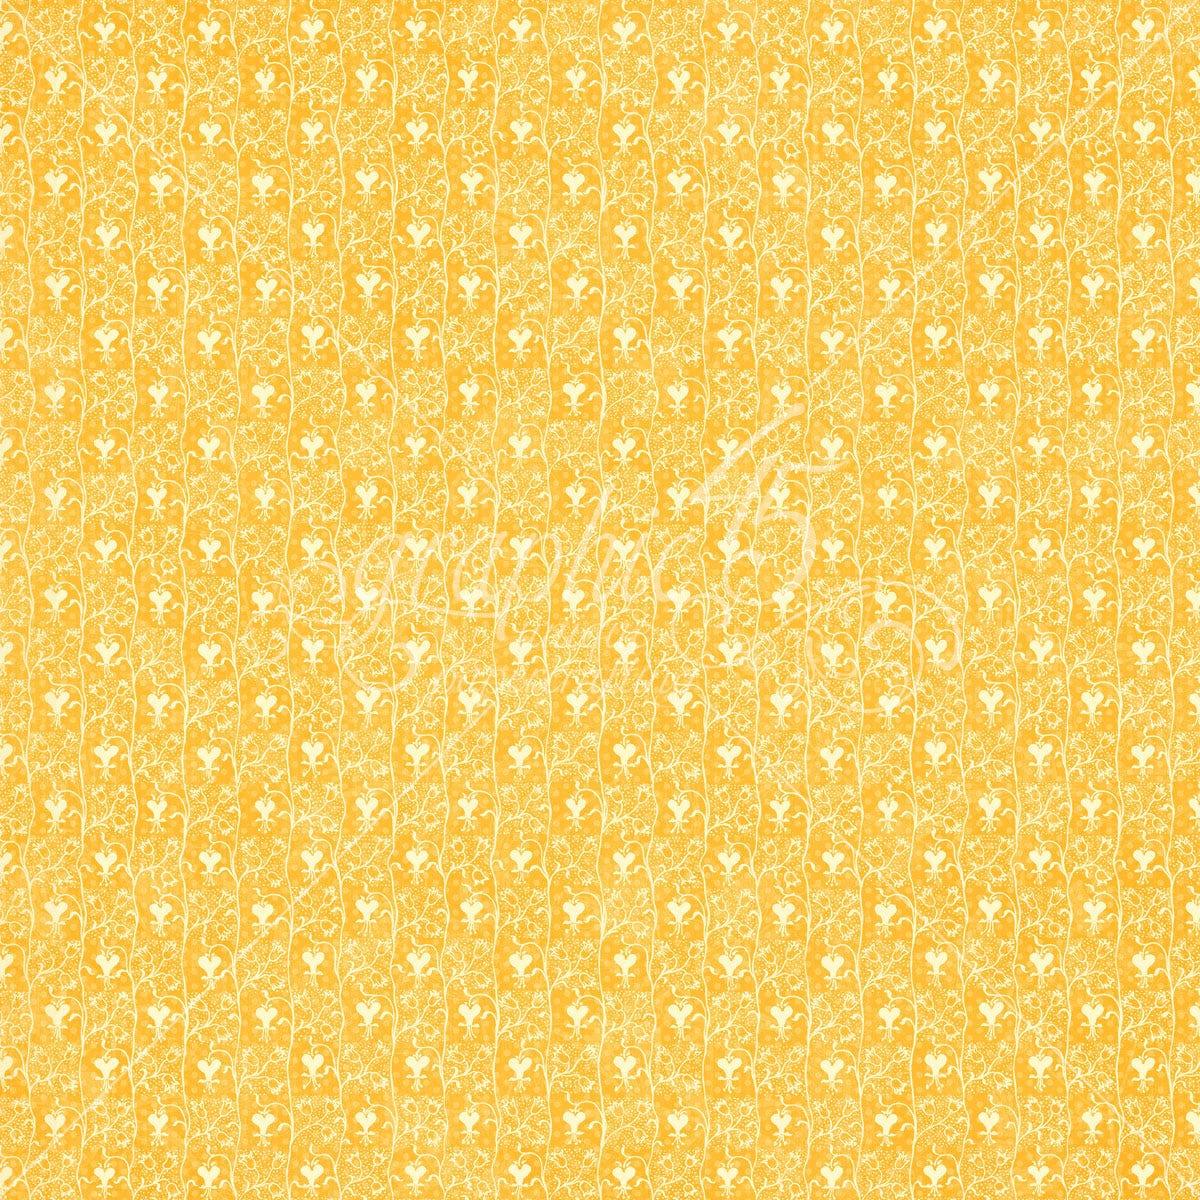 Little Things Collection Bloom & Grow 12 x 12 Double-Sided Scrapbook Paper by Graphic 45 - Scrapbook Supply Companies